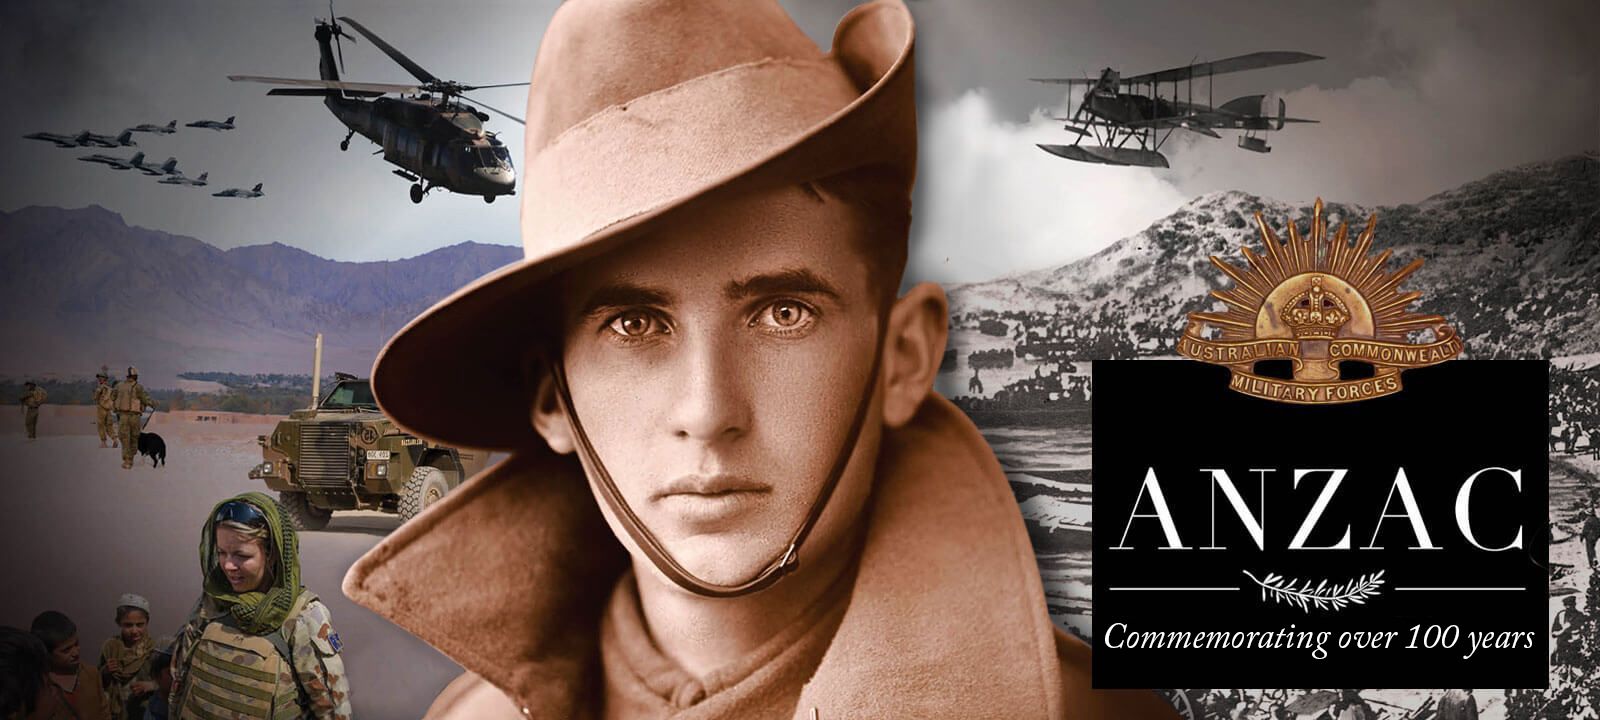 Each year on Anzac Day, New Zealanders (and Australians) mark the anniversary of the Gallipoli landings of 25 April 1915.